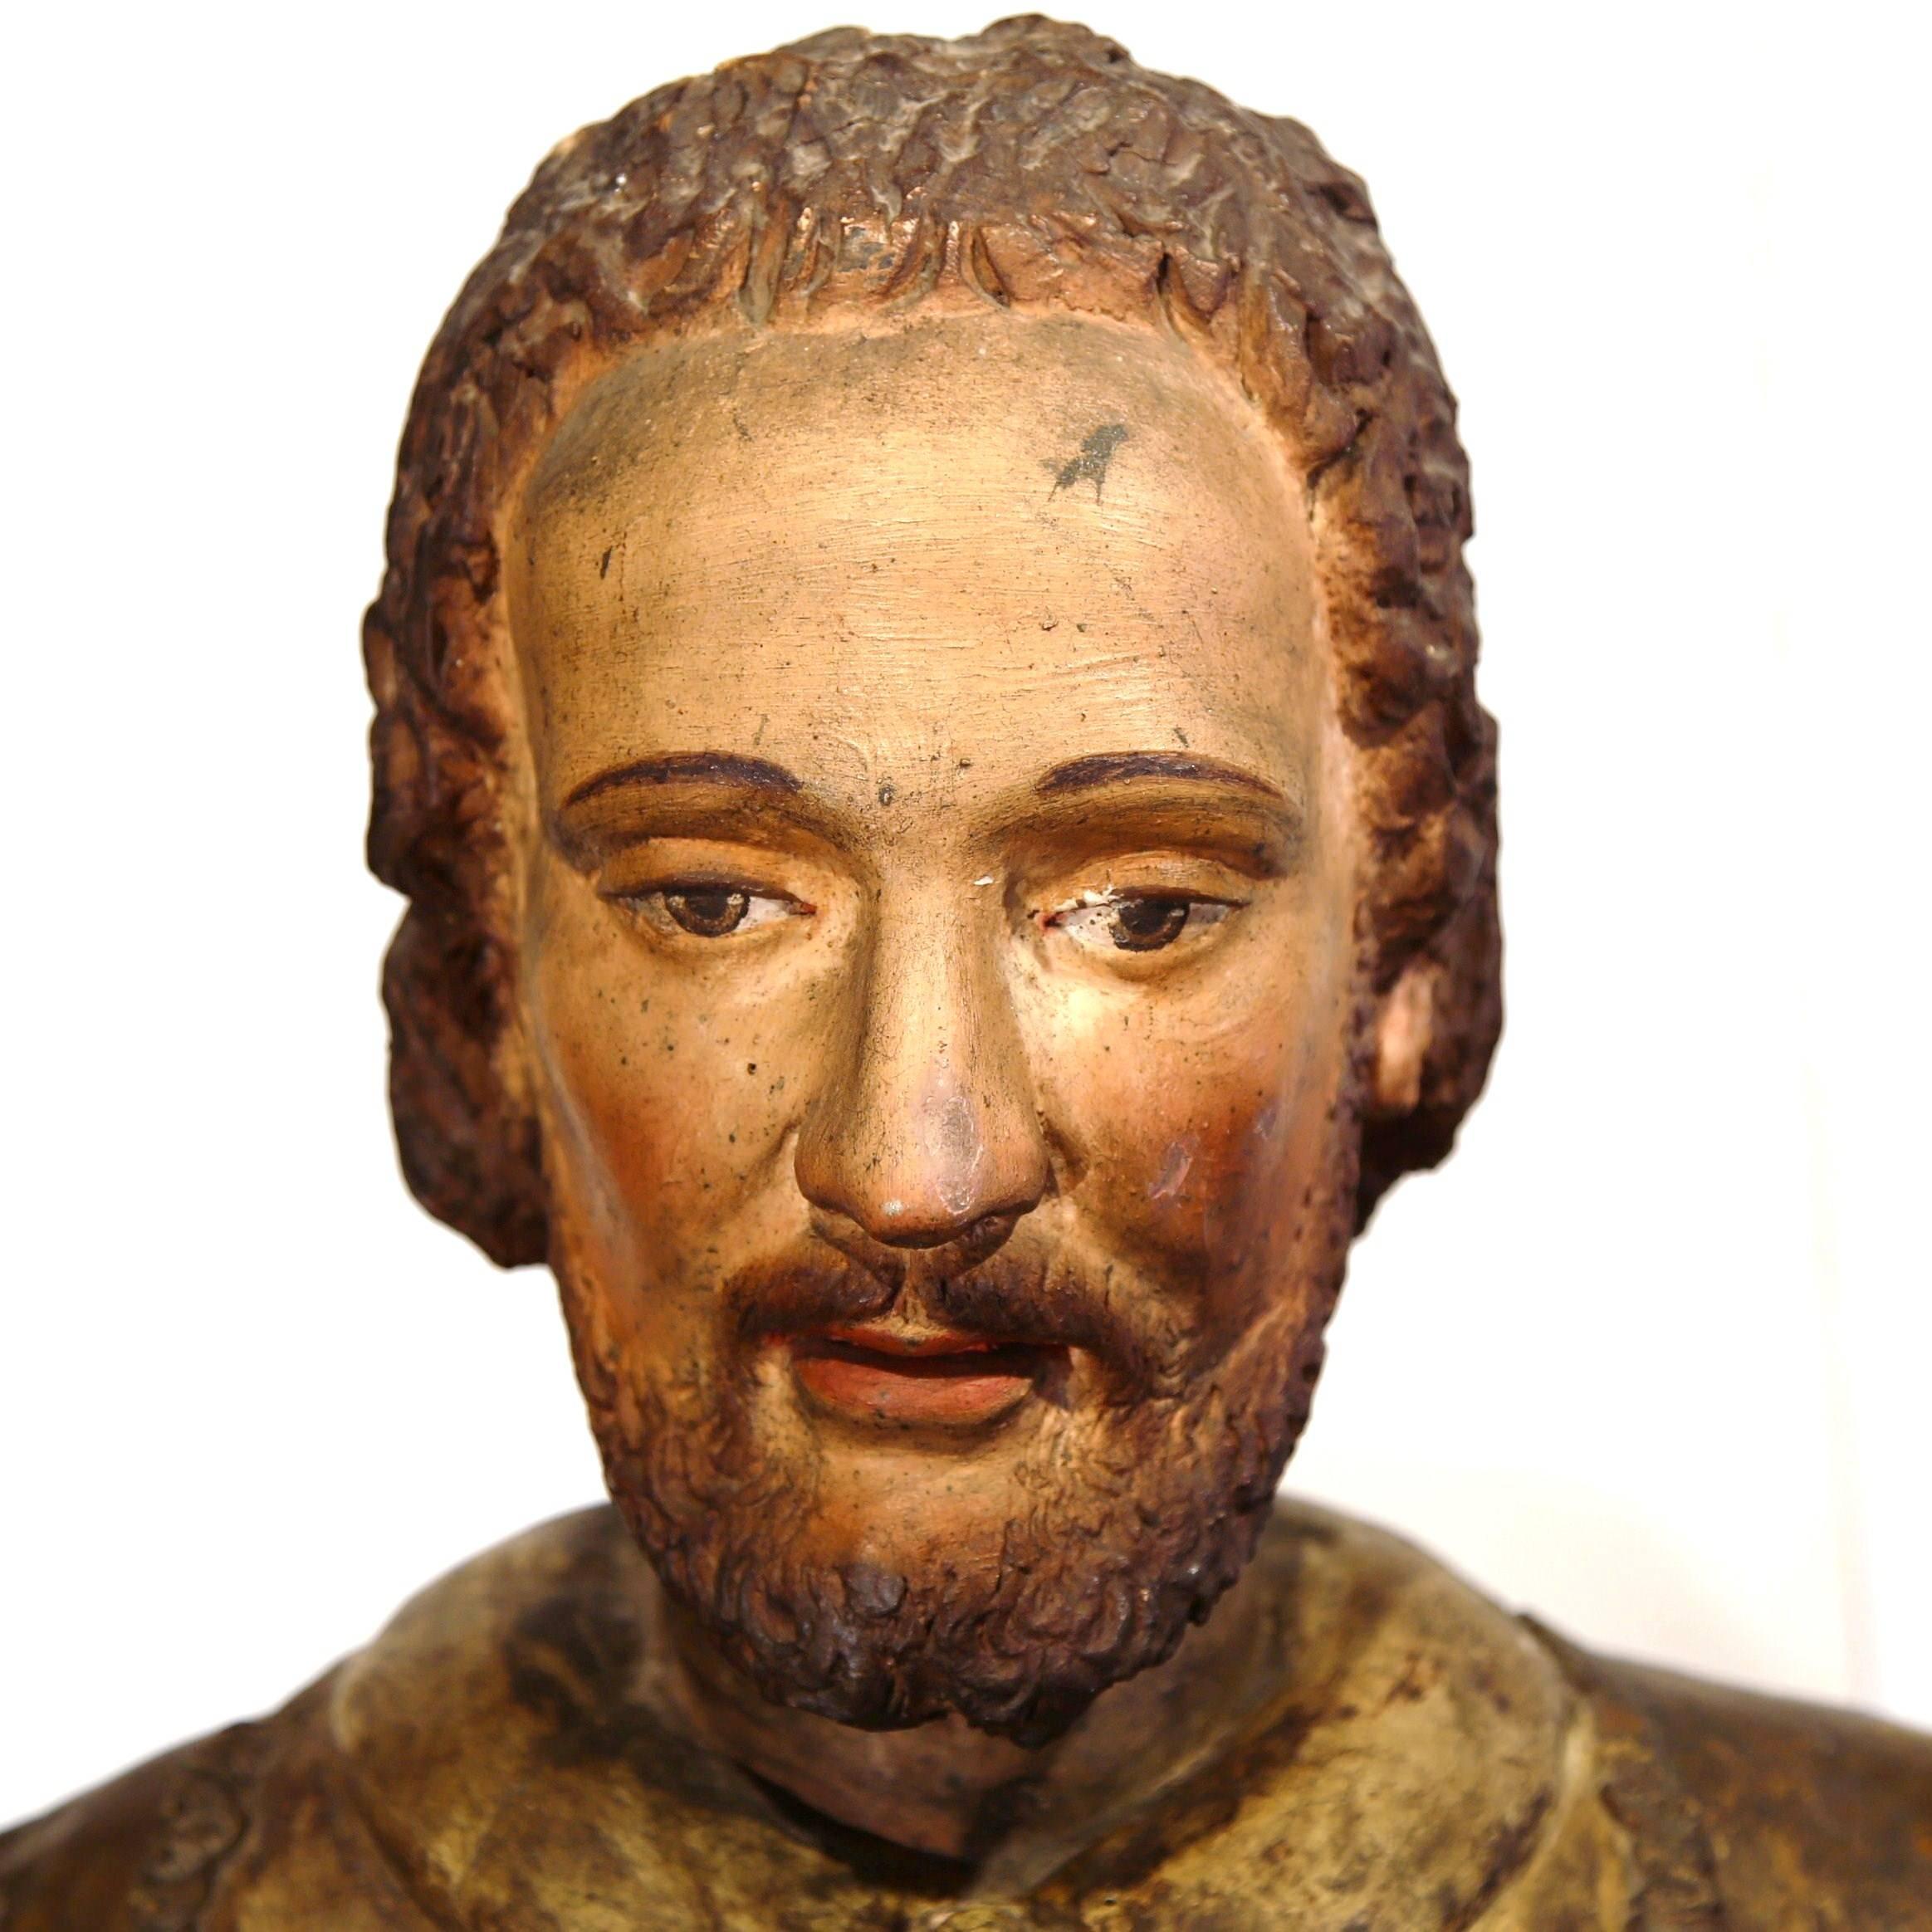 Gilt 18th Century Spanish Carved Statue of Saint Francis-Xavier with Gold Leaf Finish